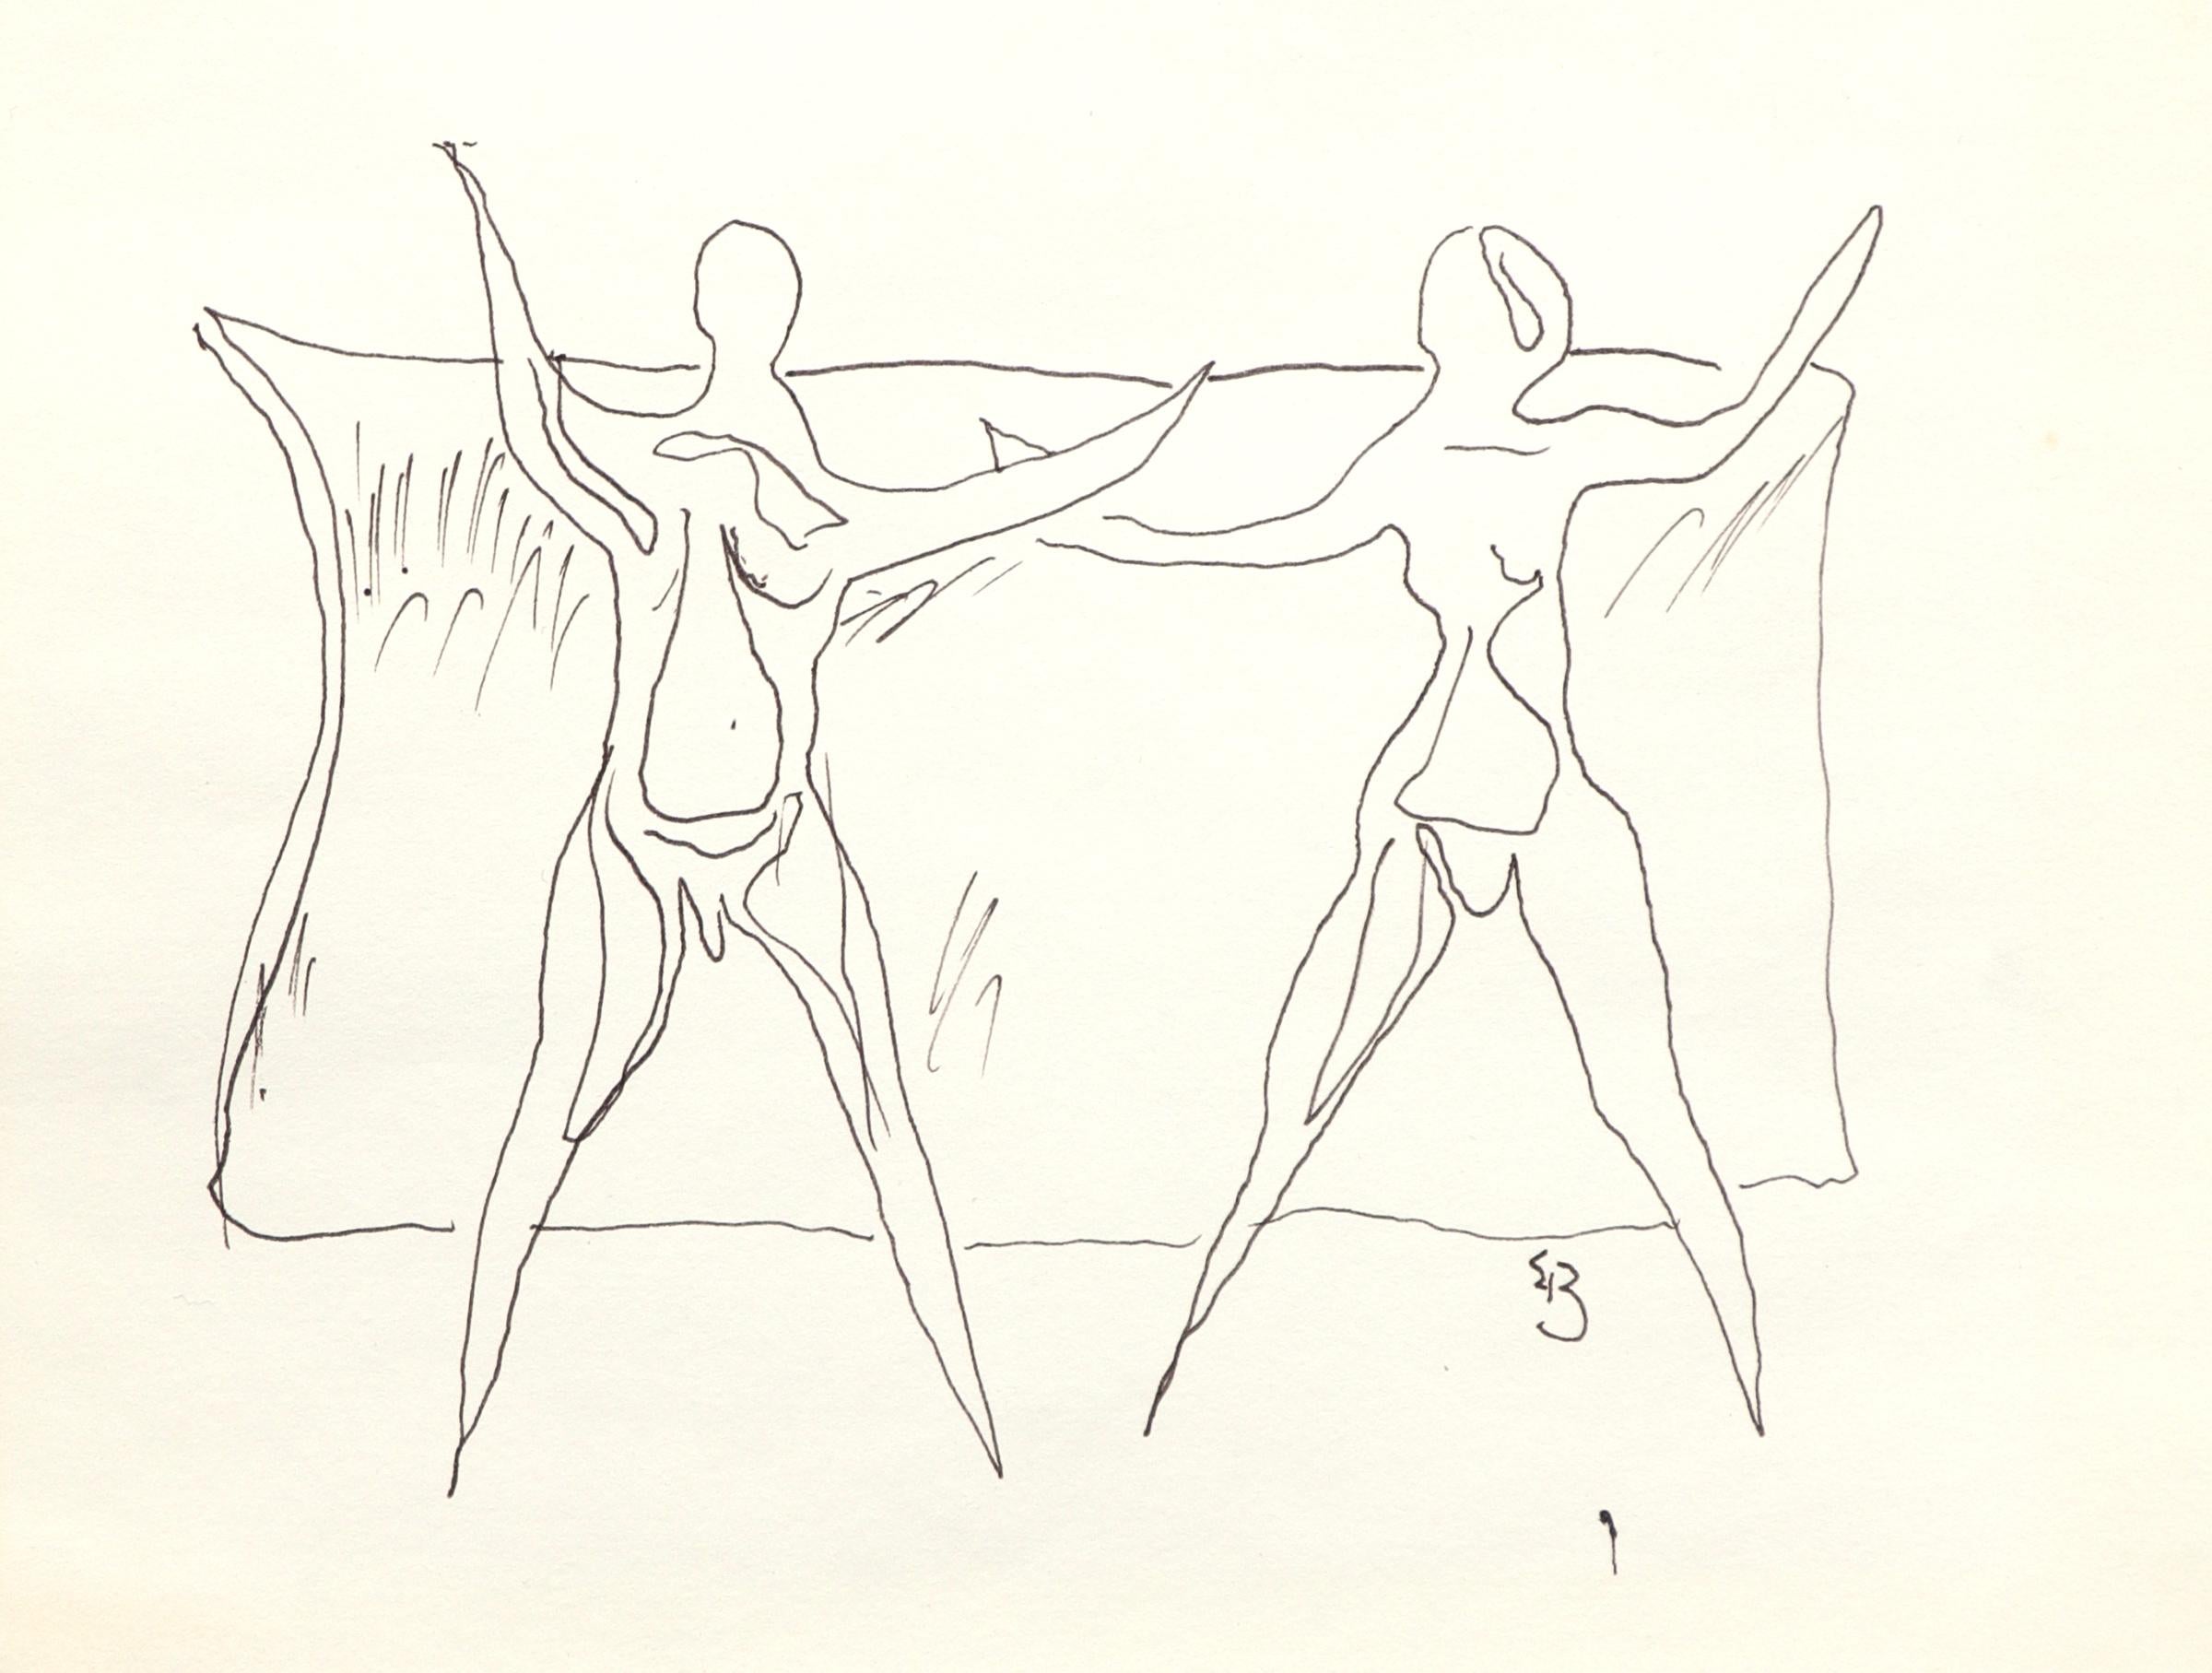 1970s Two Figures, Black Pen Ink Drawing , American Modern Semi-Abstract Figures - Art by Edgar Britton